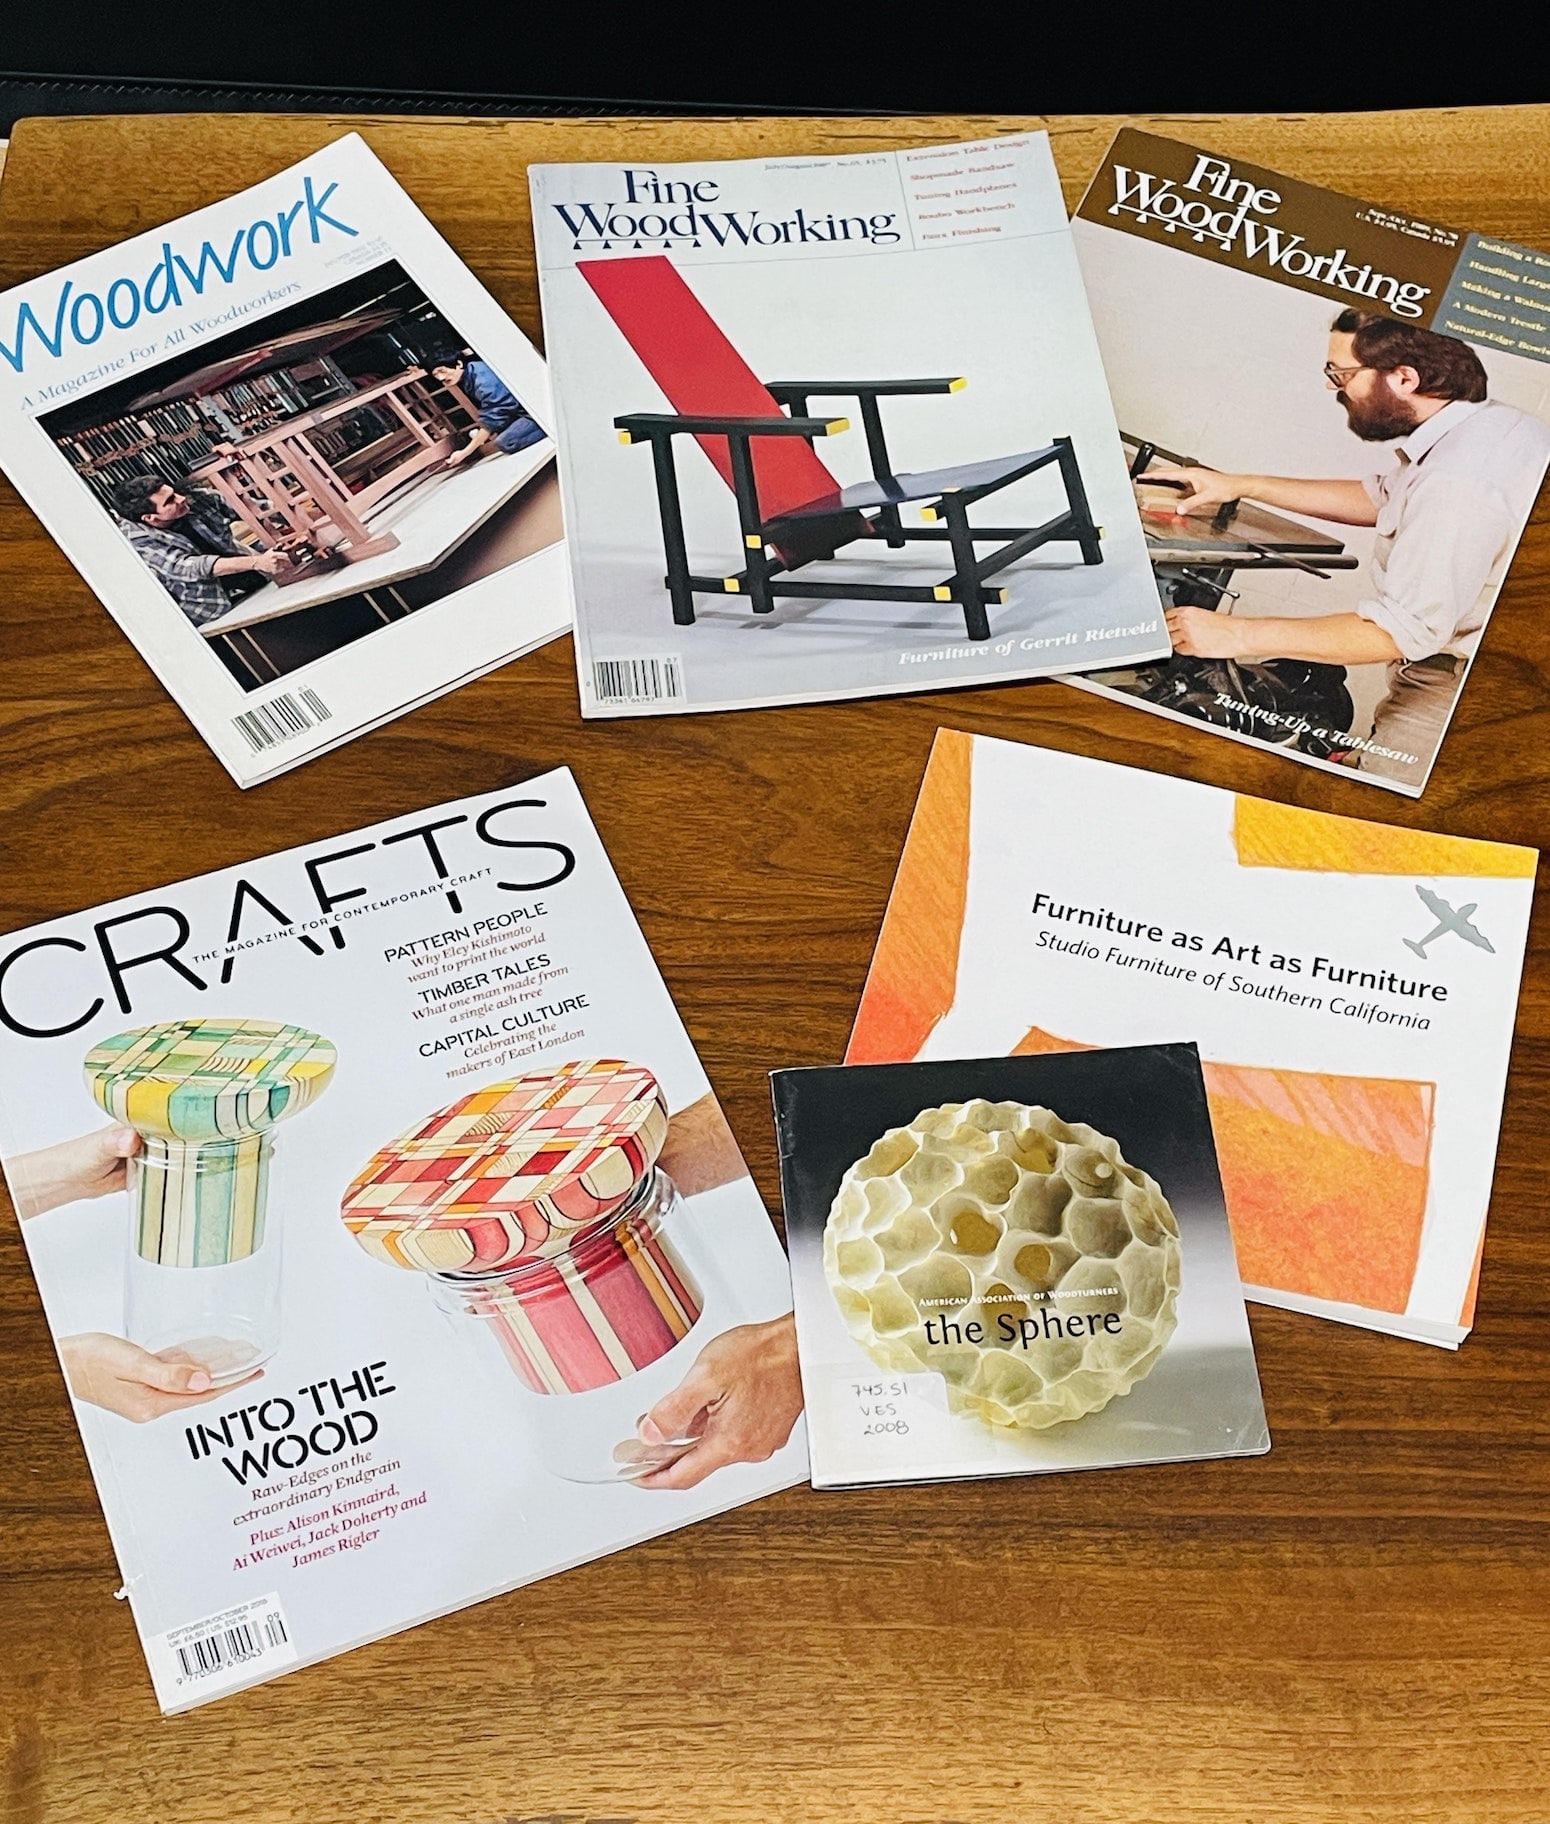 Colorful magazine covers of Crafts, Woodwork, Fine Woodworking, and various Furniture woodworking journals